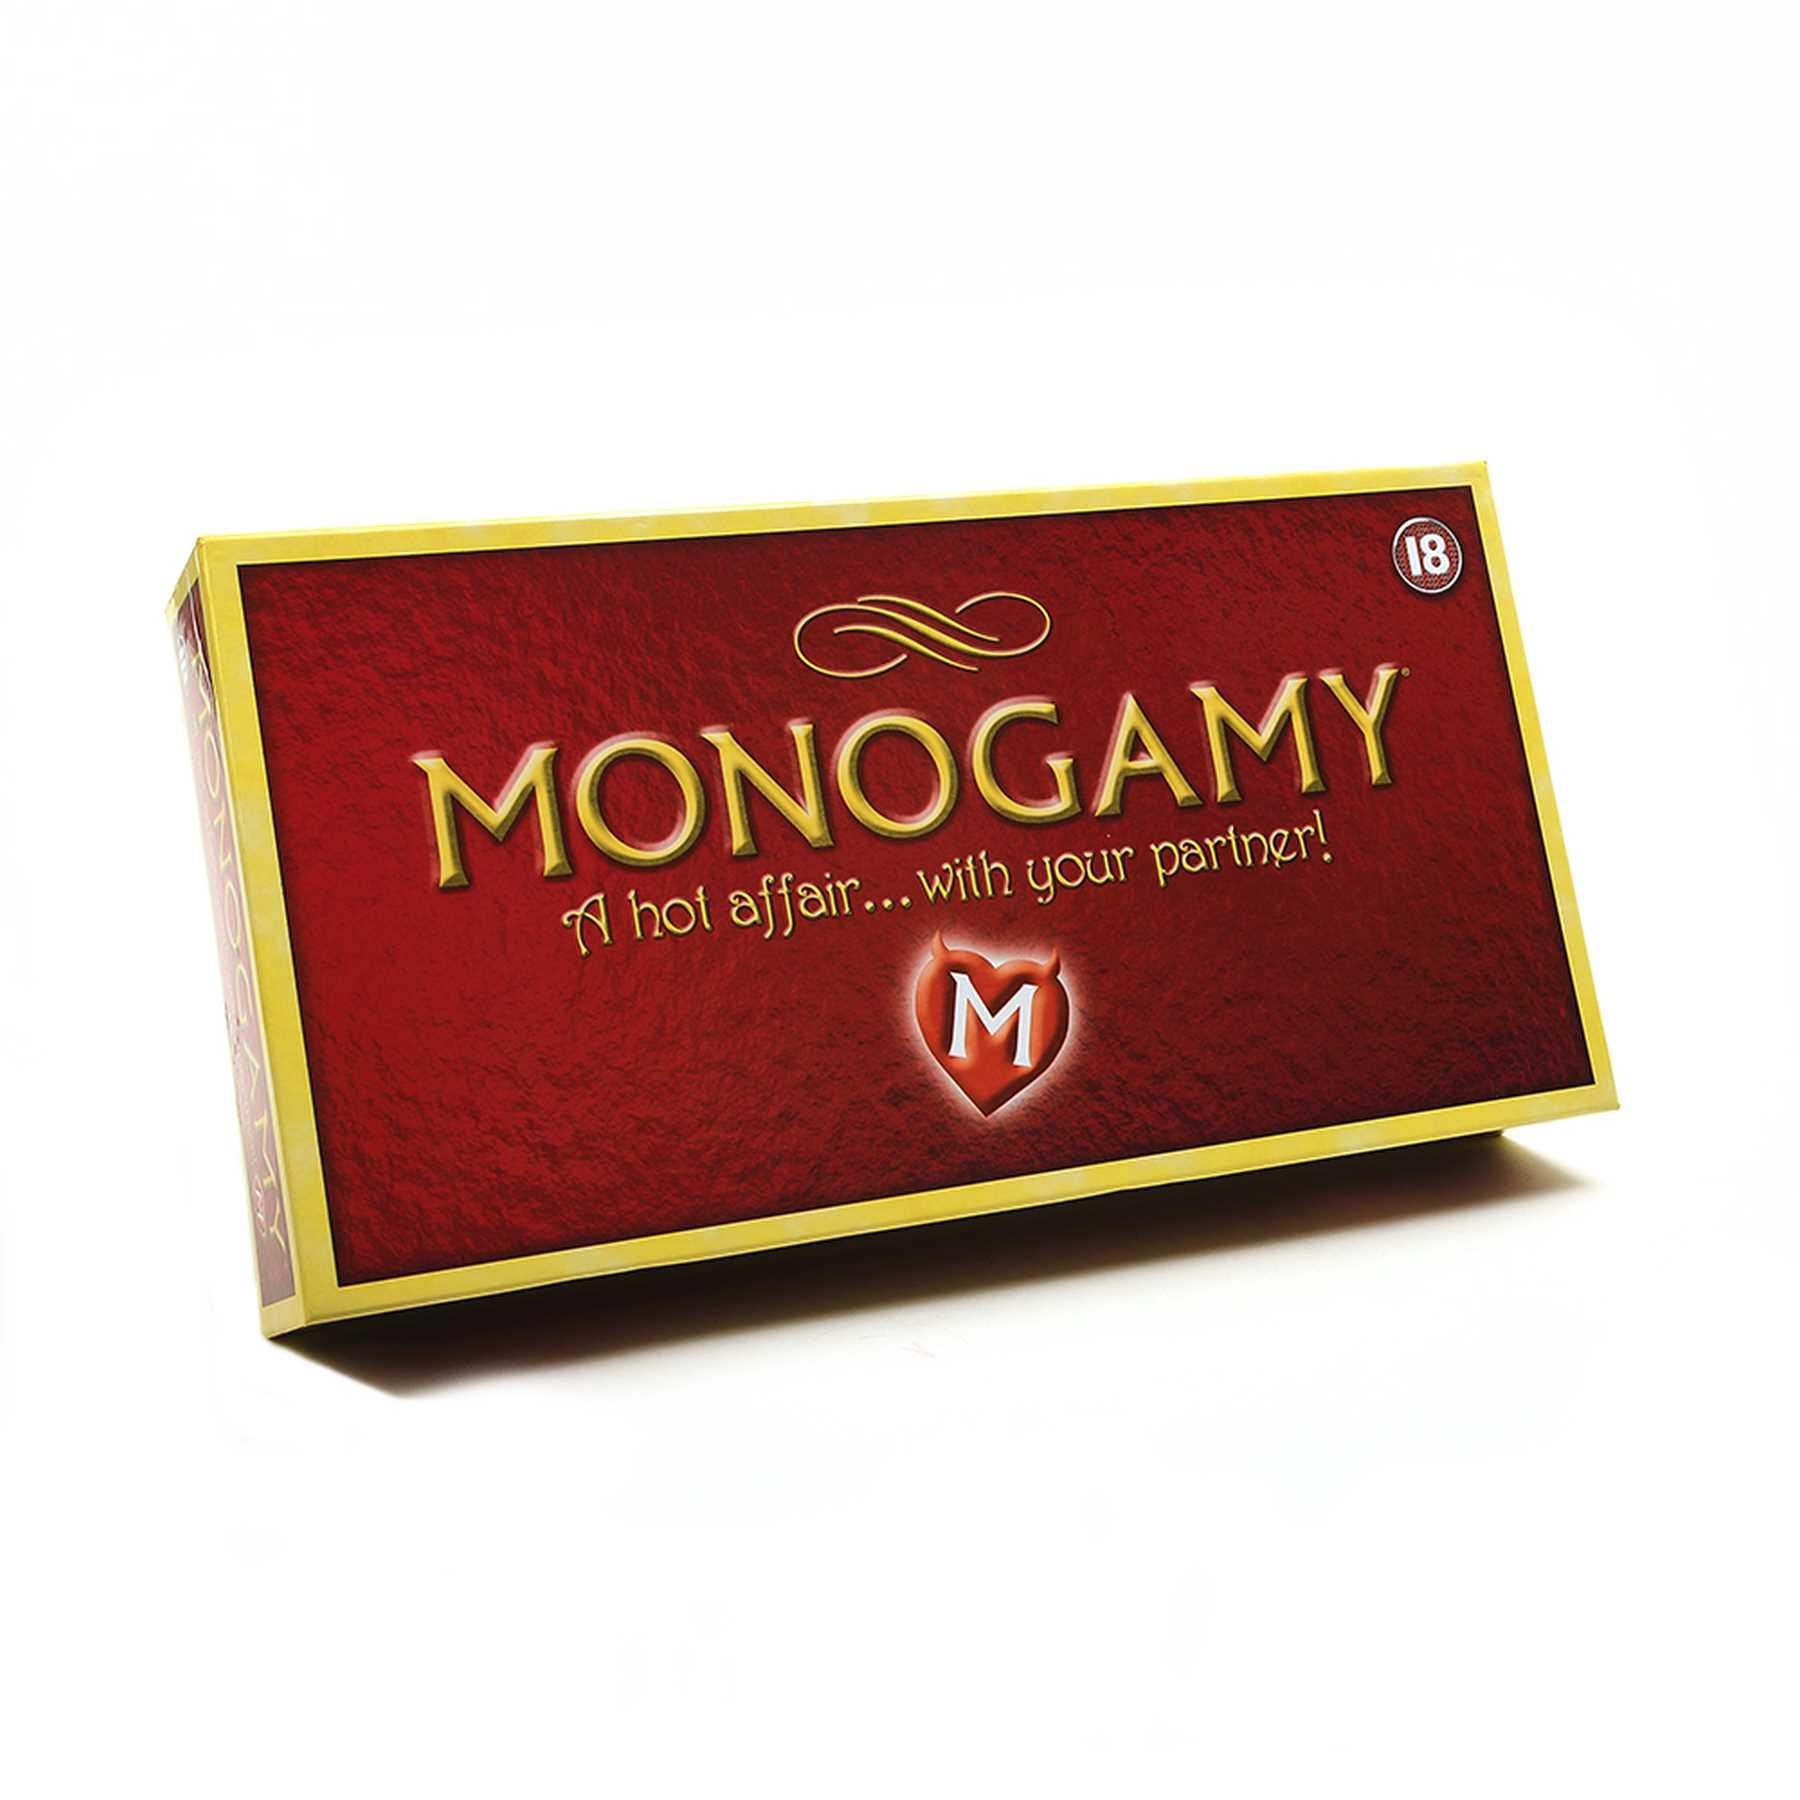 Monogamy A Hot Affair With Your Partner Game Box and game components English front of game